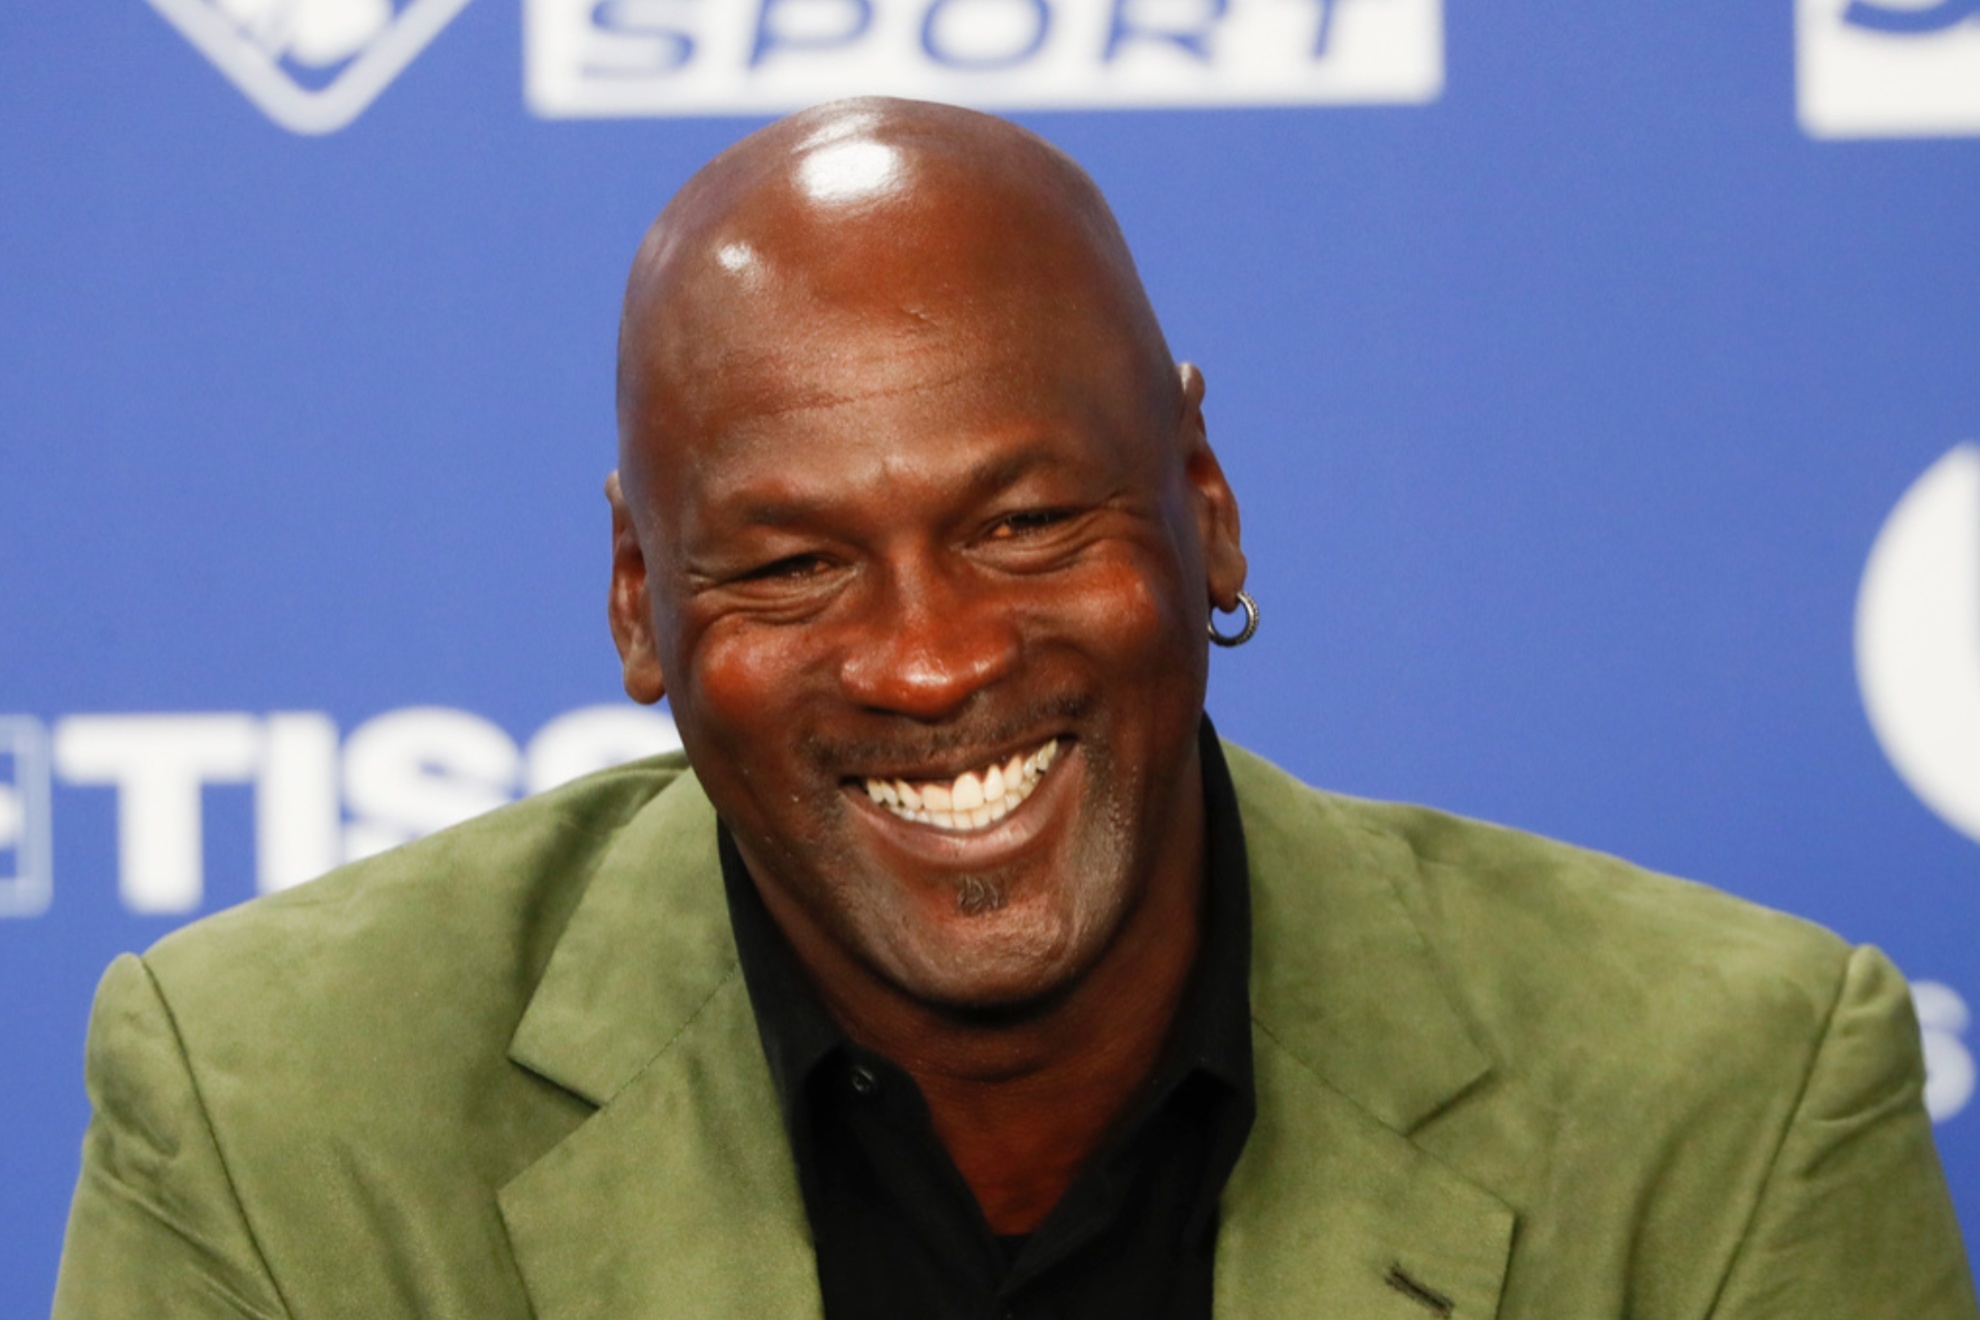 Michael Jordan is the wealthiest athlete in the world.